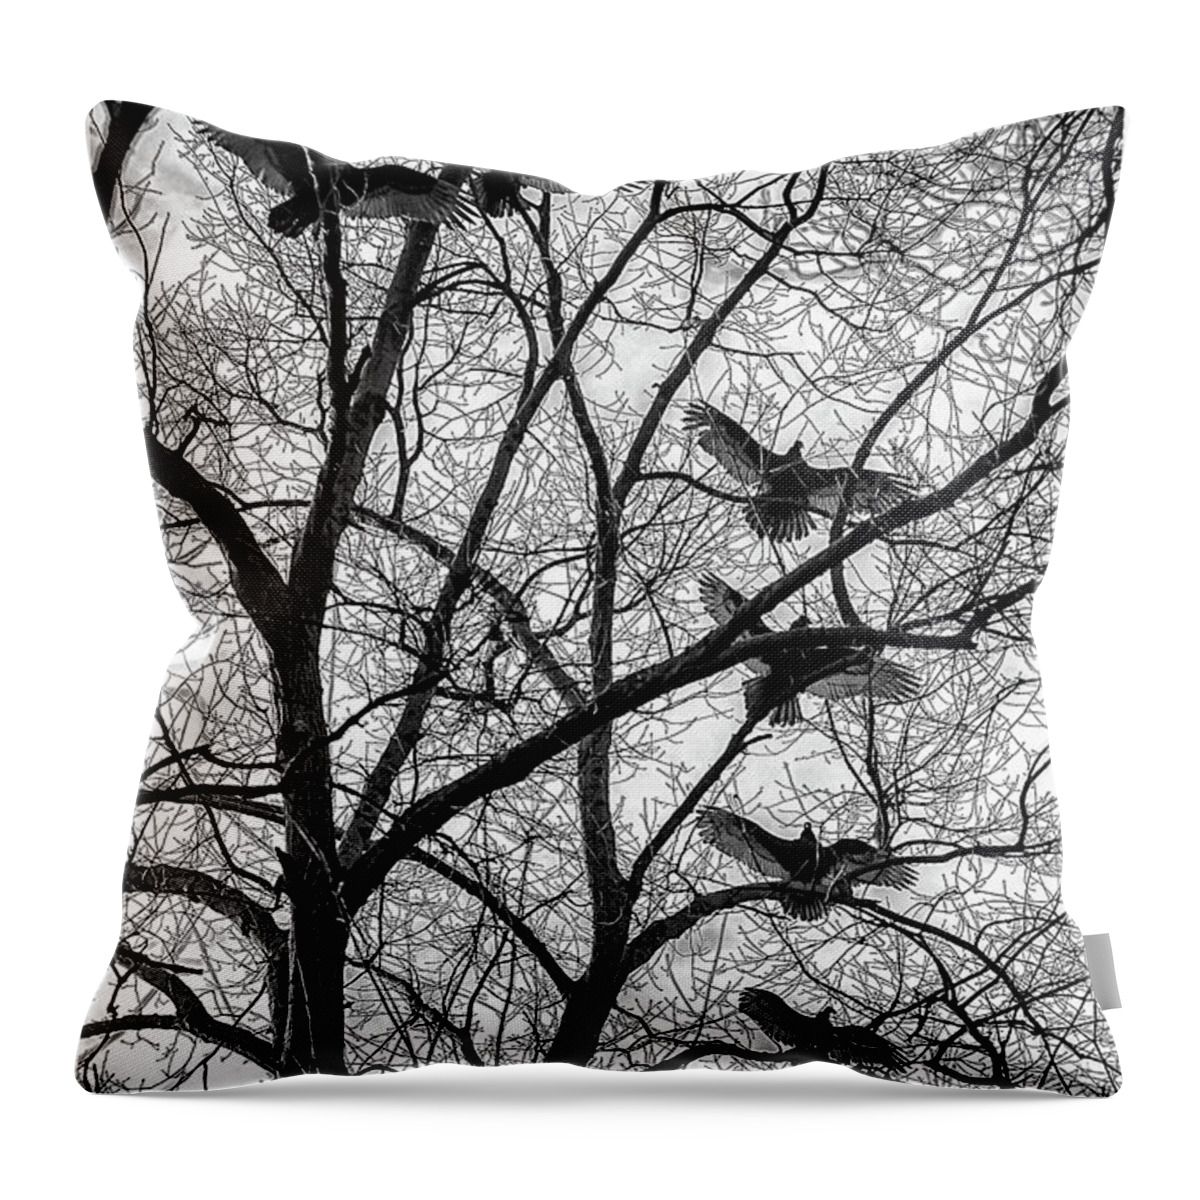 Birds Throw Pillow featuring the photograph Turkey Vultures Photography by Louis Dallara